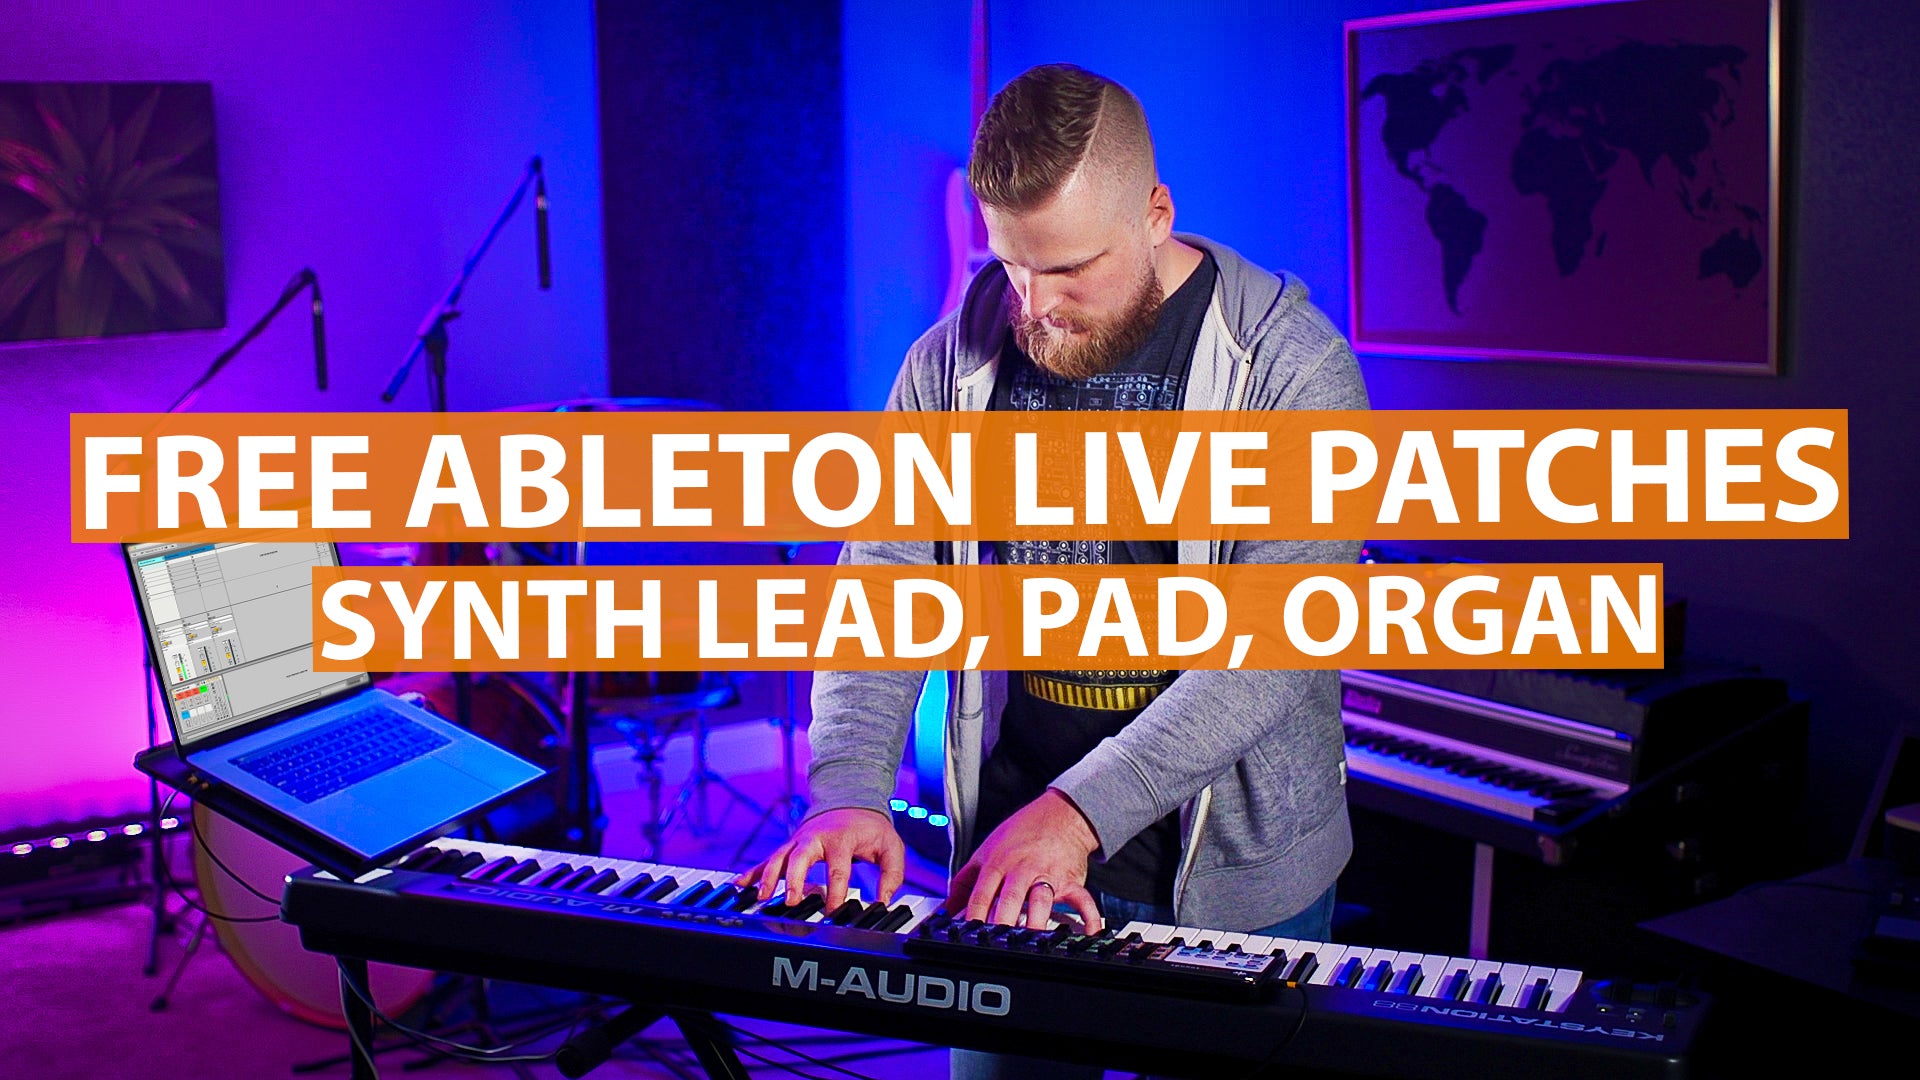 Free Ableton Live Patches Demo from Sunday Sounds